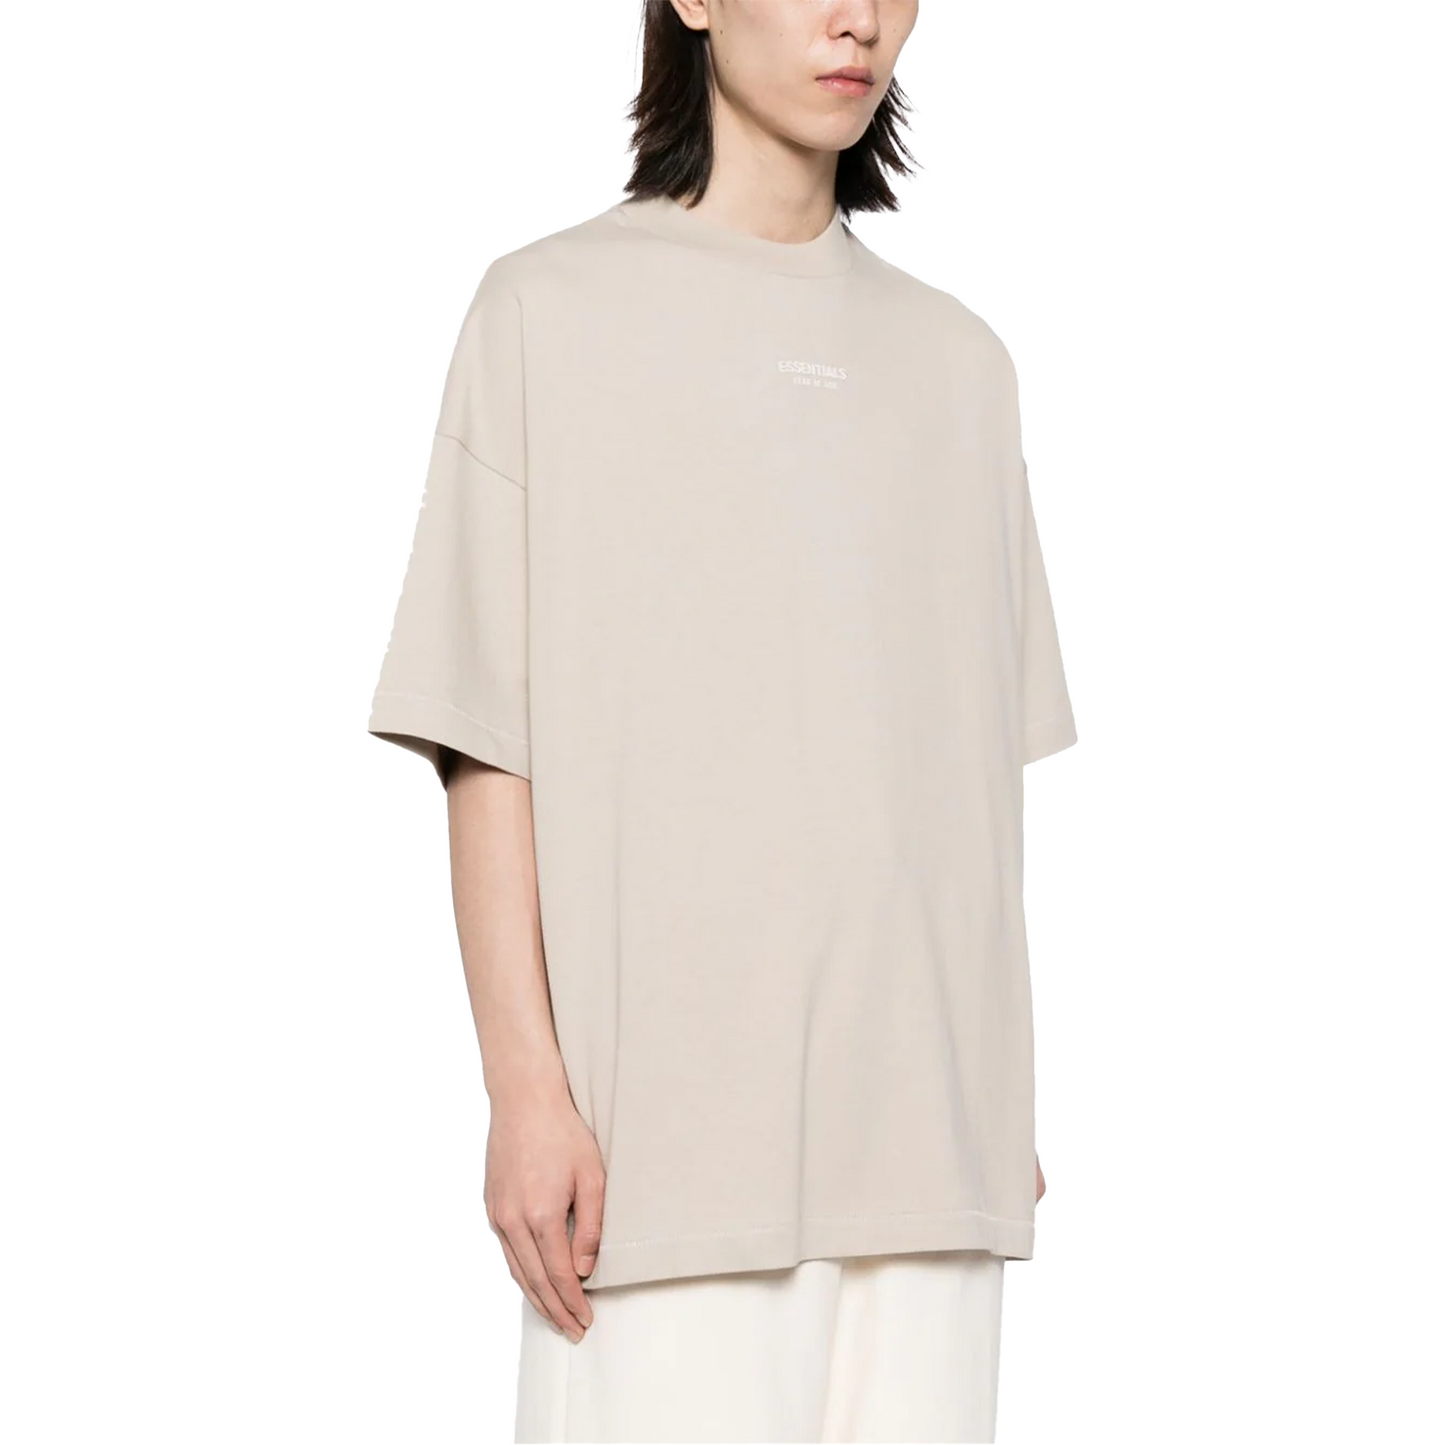 Fear of God Essentials Tee Core Silver Cloud